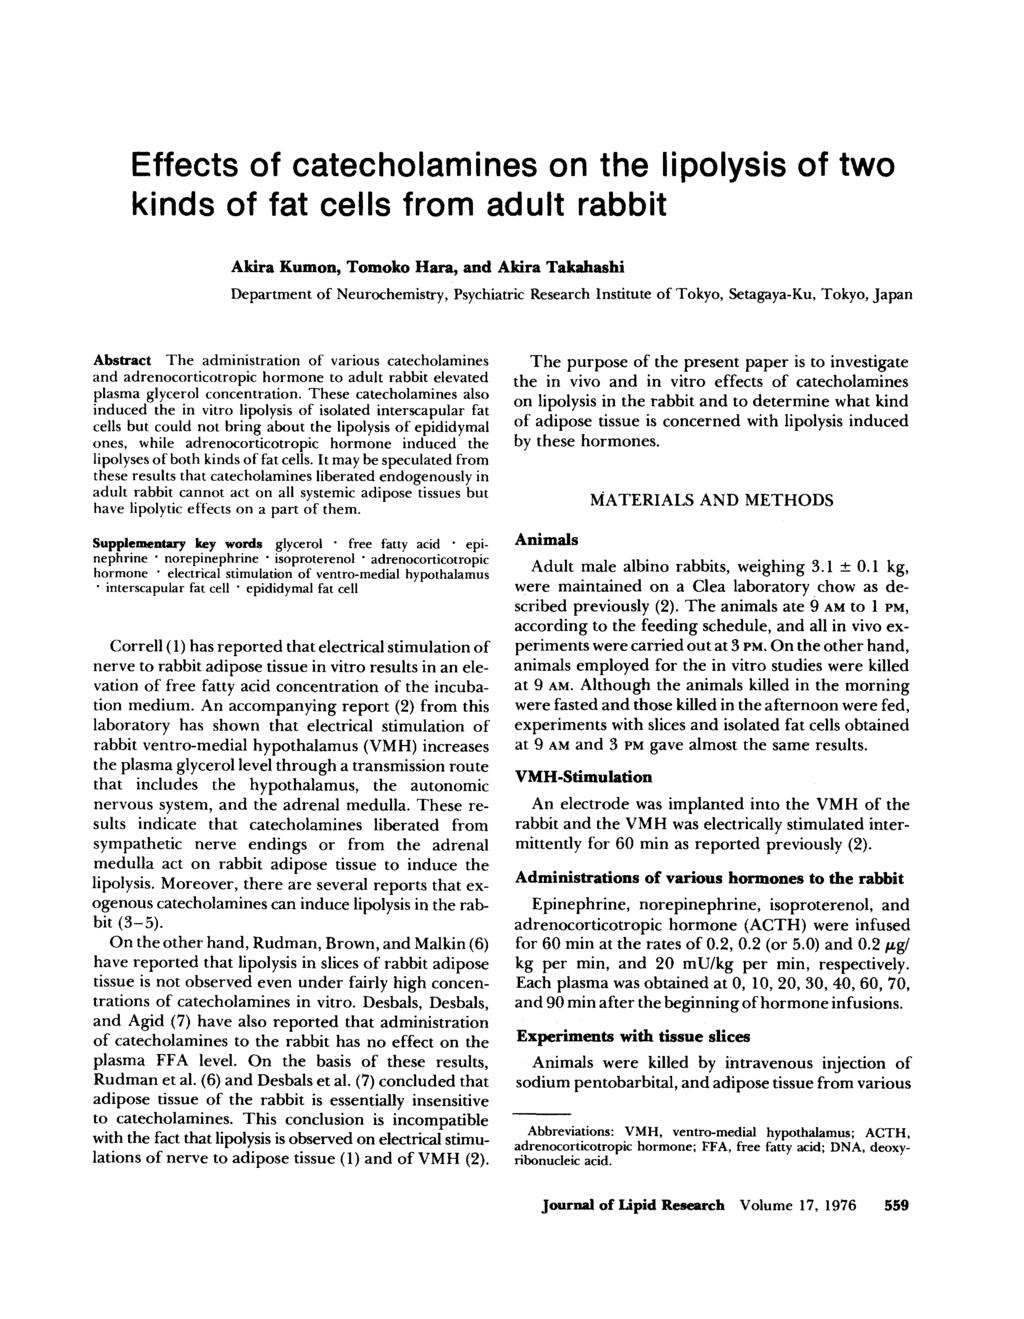 Effects of catecholamines on the lipolysis of two kinds of fat cells from adult rabbit Akira Kumon, Tomoko Hara, and Akira Takahashi Department of Neurochemistry, Psychiatric Research Institute of